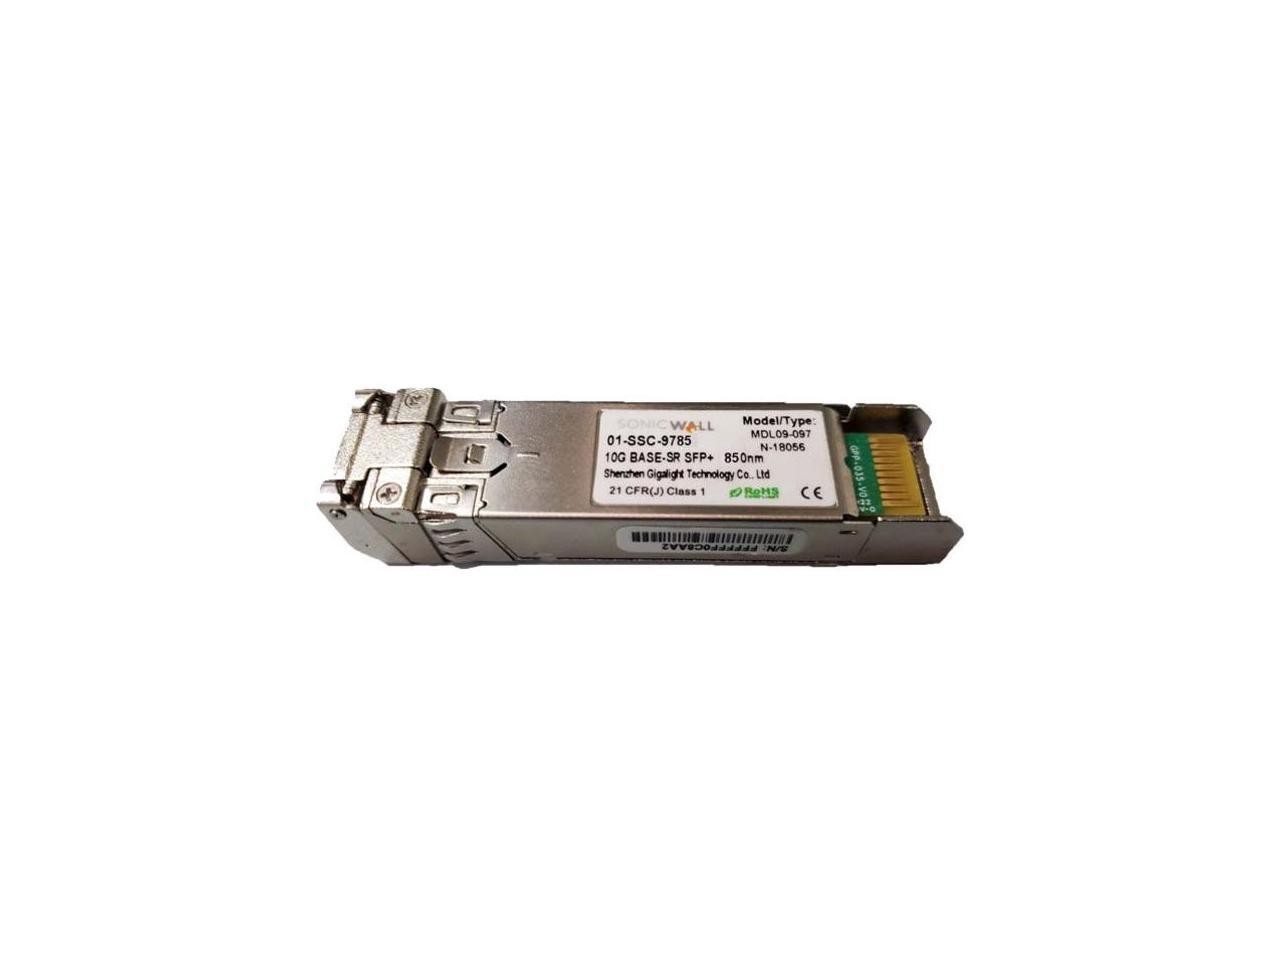 Sonicwall Genuine 10GbE SFP+ Transceiver Module 01-SSC-9785